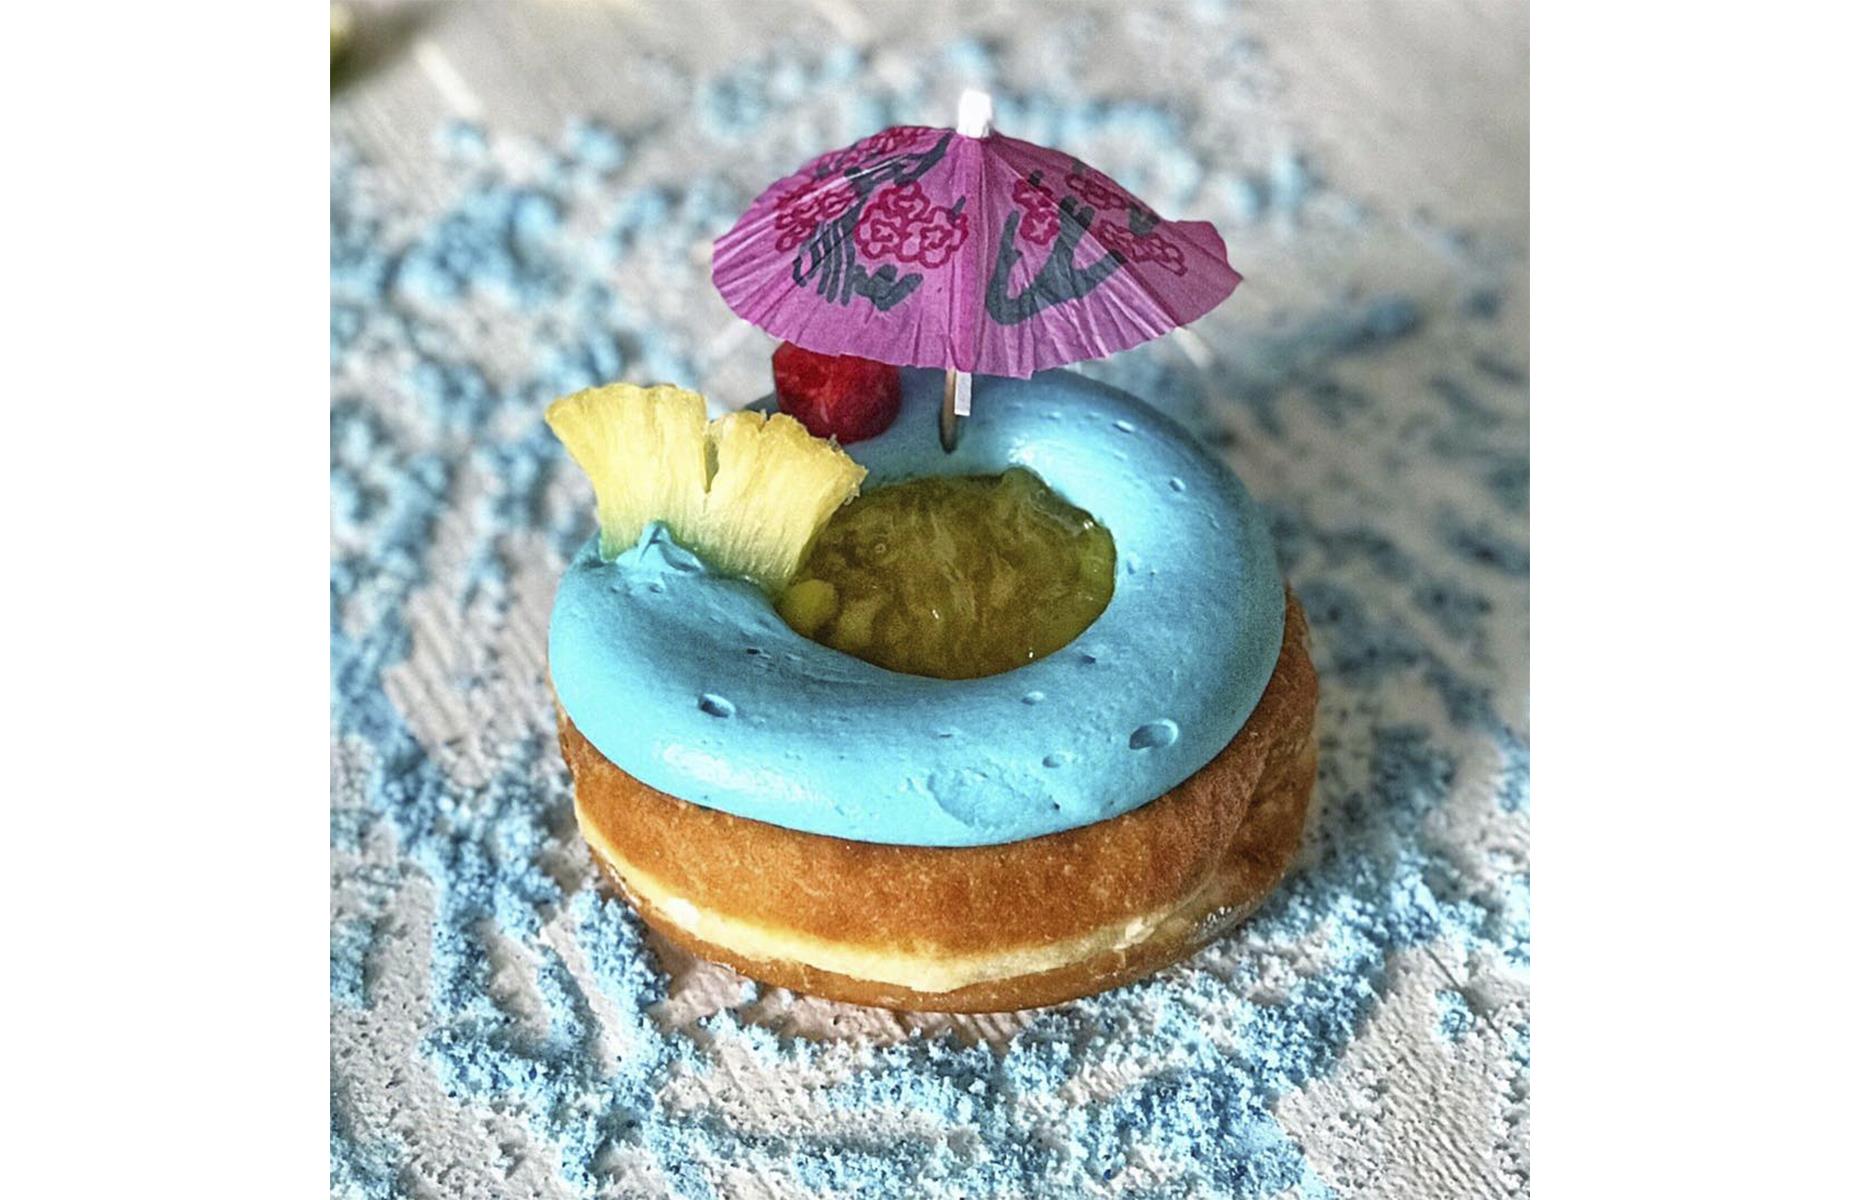 <p>Say aloha to the Blue Hawaiian from <a href="https://donutcrazy.com/">Donut Crazy</a>, a shamelessly bold and colorful creation that would look very much at home lounging by the pool. The limited-edition donut, released as one of the small Connecticut chain's monthly 'crazies' selection, had a sweet pineapple glaze and was topped with blue coconut buttercream and a garnish of pineapple, cherry and mini umbrella. A tropical paradise in donut form.</p>